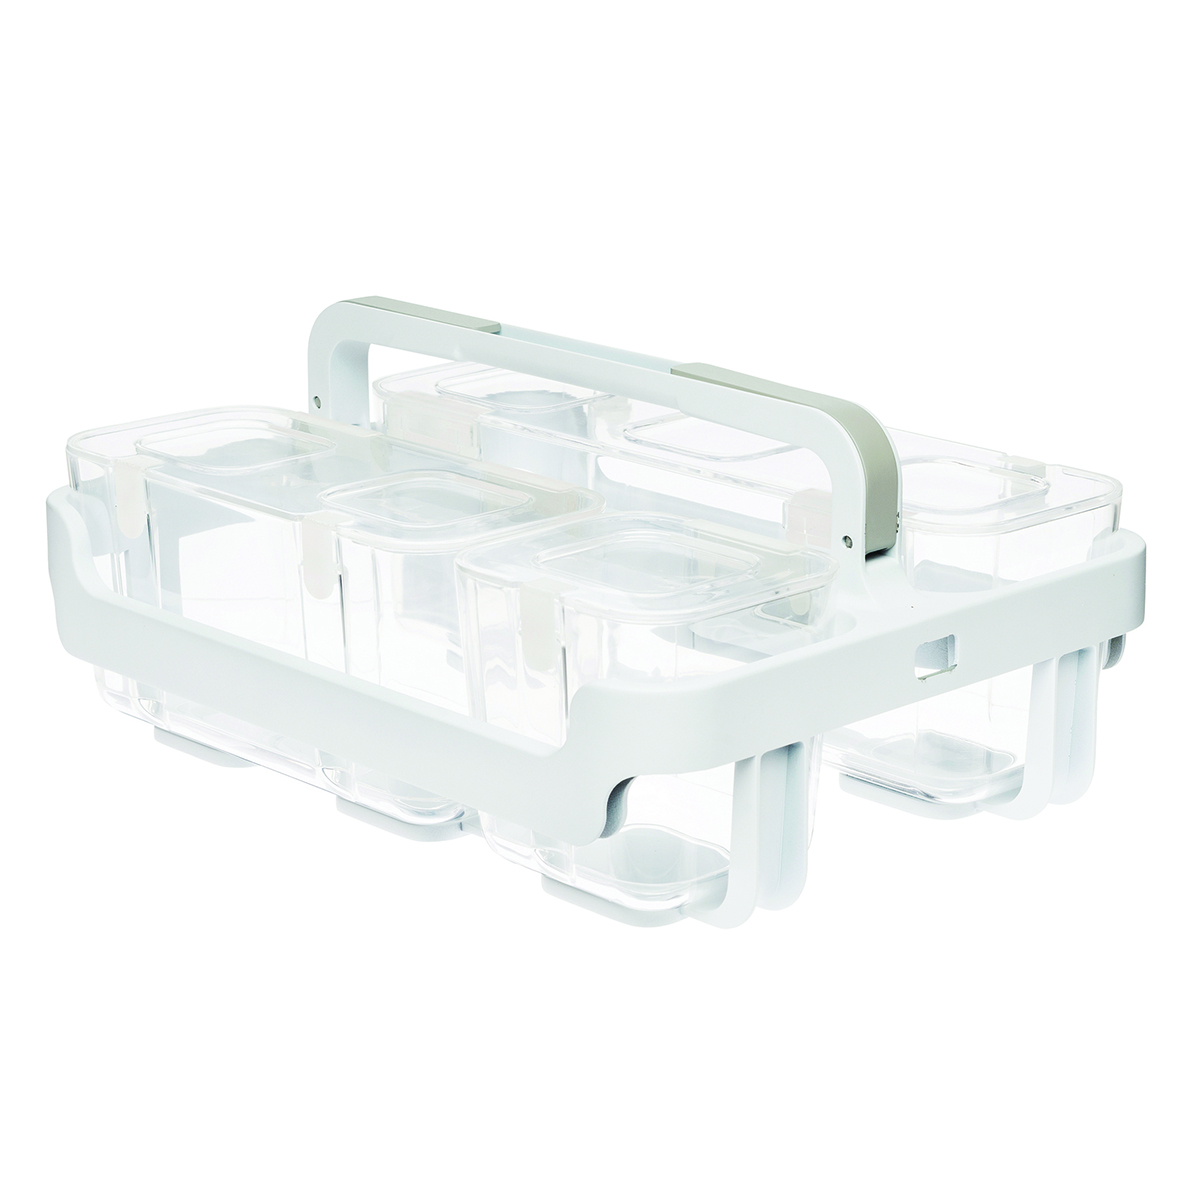 https://www.containerstore.com/catalogimages/392455/10080739-Deflecto-Caddy-Organizer-Fr.jpg